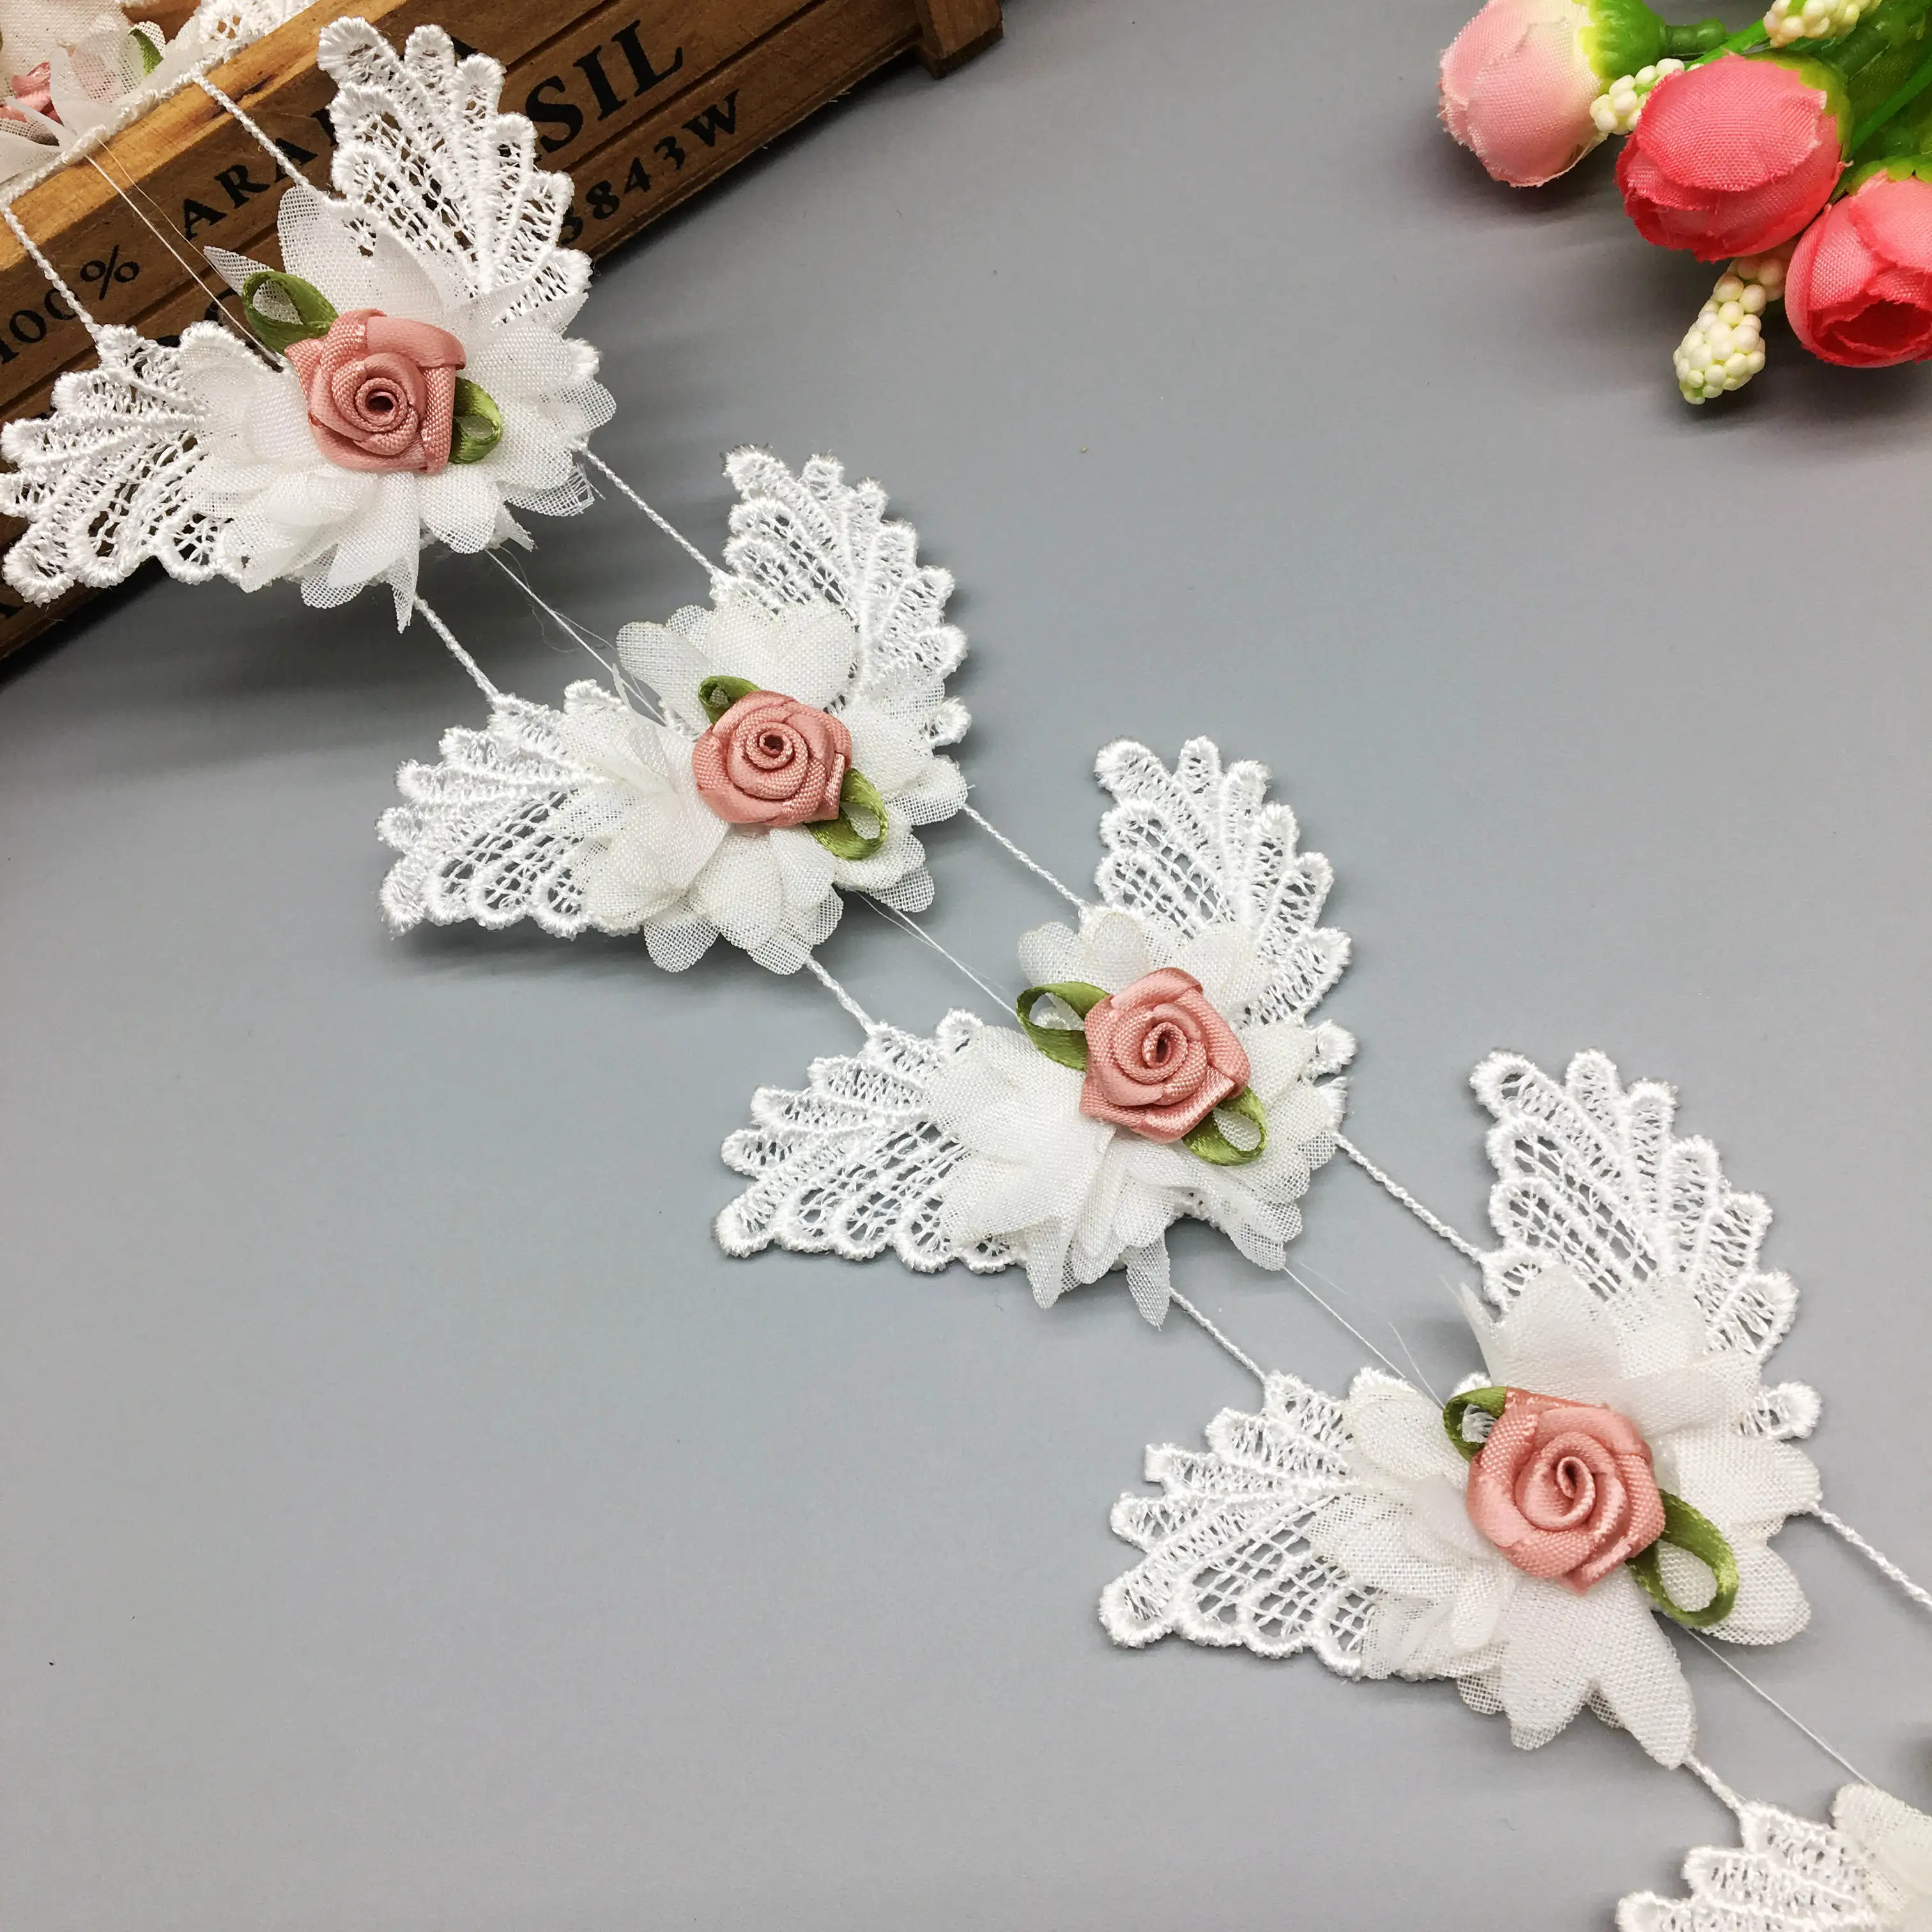 1y 3D Flower Embroidered Lace Sewing Trim For DIY Handmade Crafts Cloth Applique